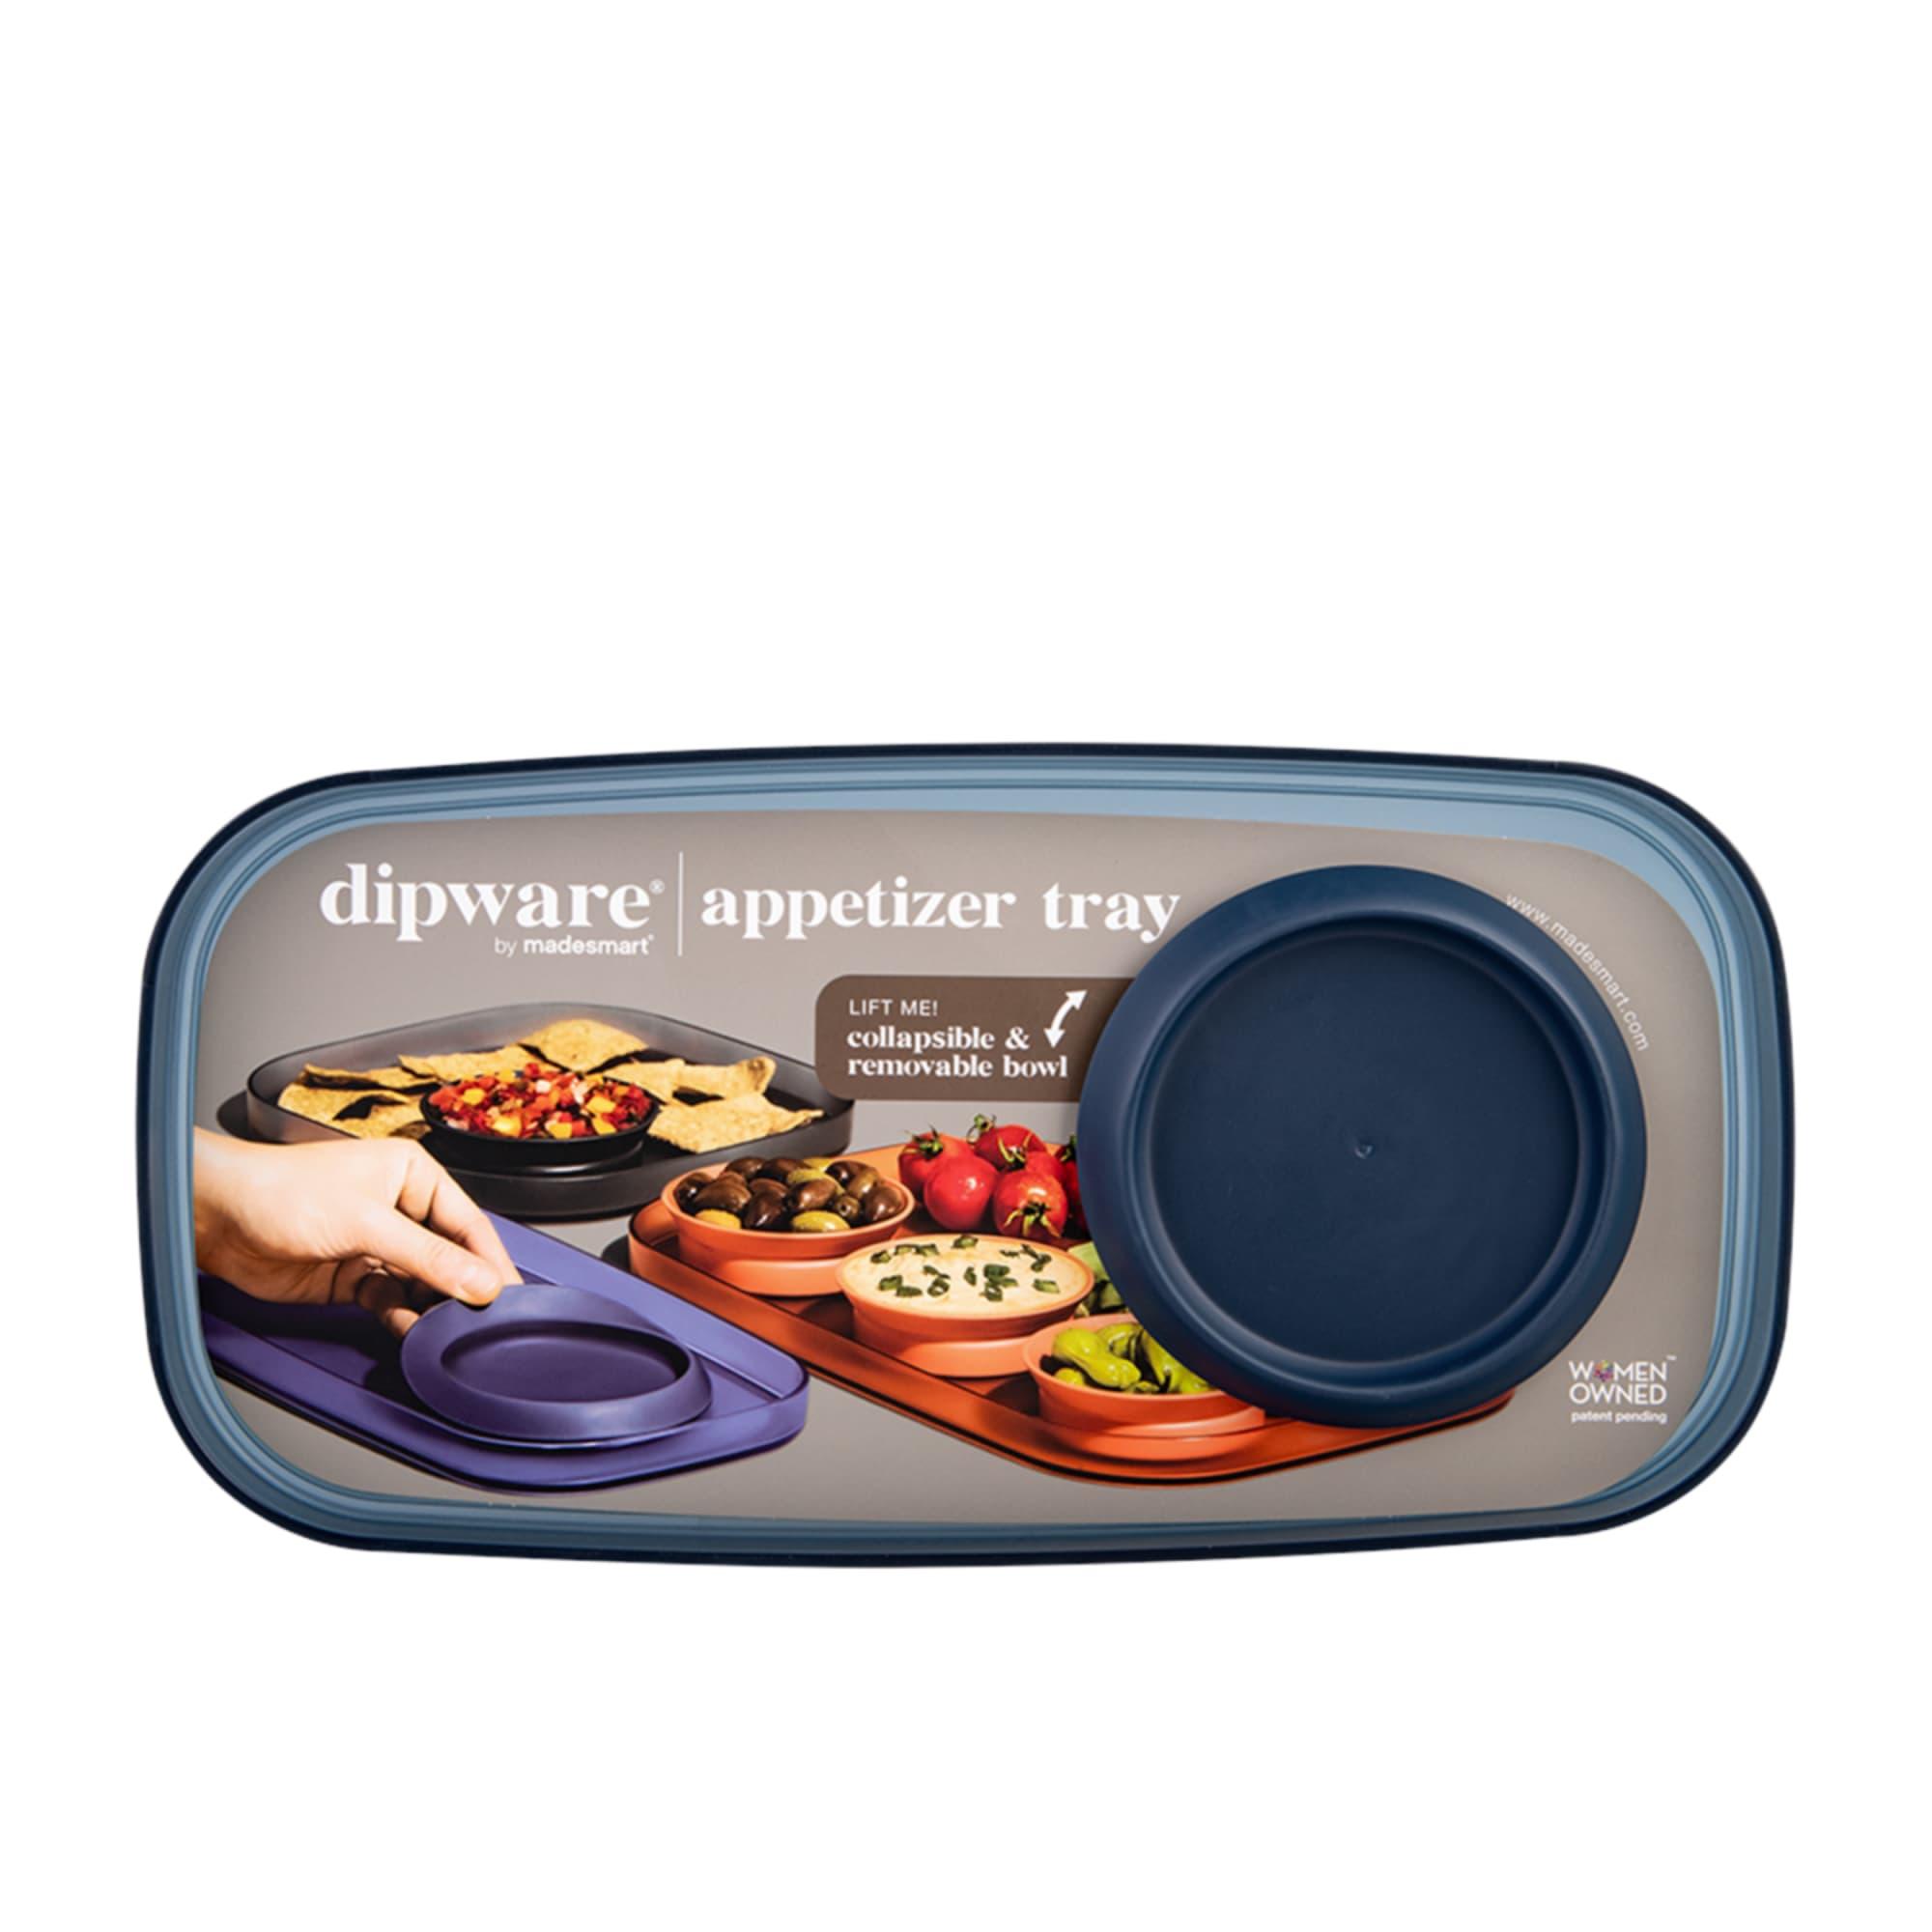 Madesmart Dipware Appetizer Tray with Bowl Midnight Blue Image 3